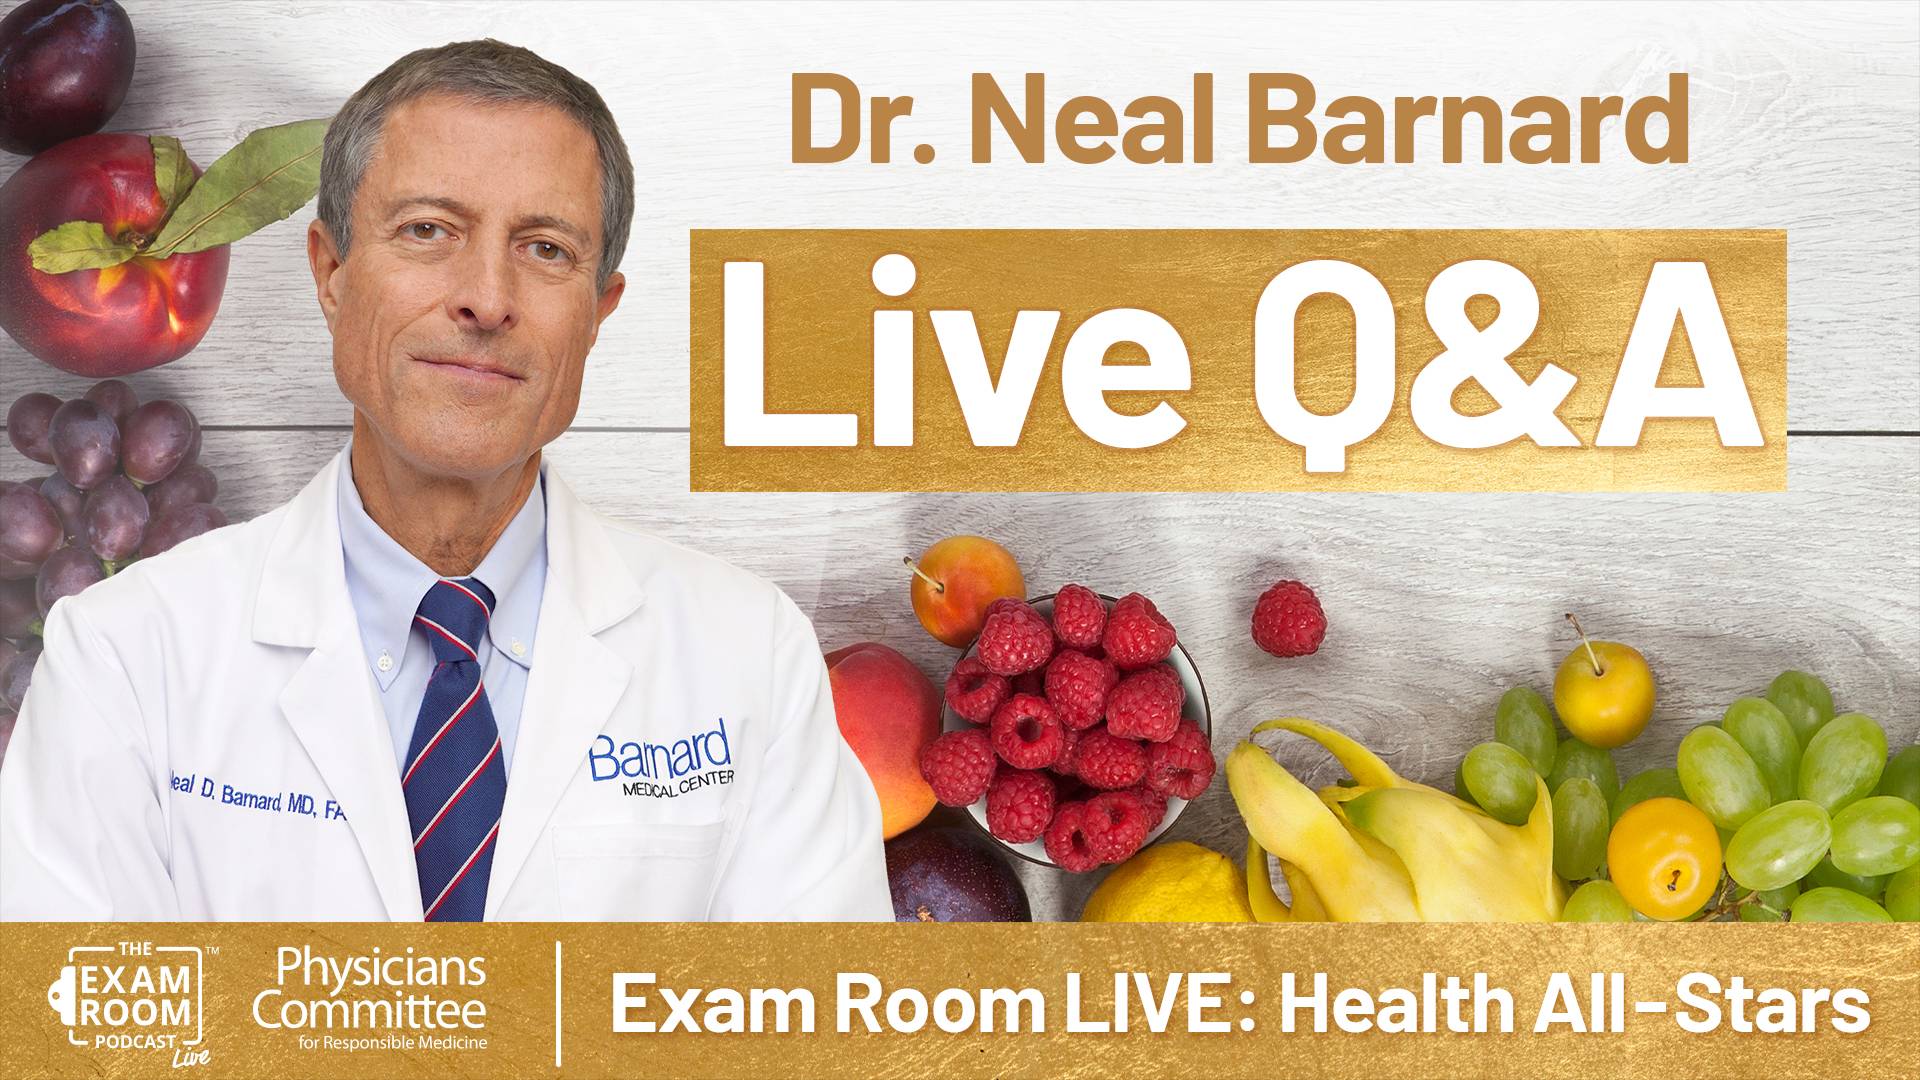 Top Diets Reviewed with Dr. Neal Barnard | Health All-Stars Series